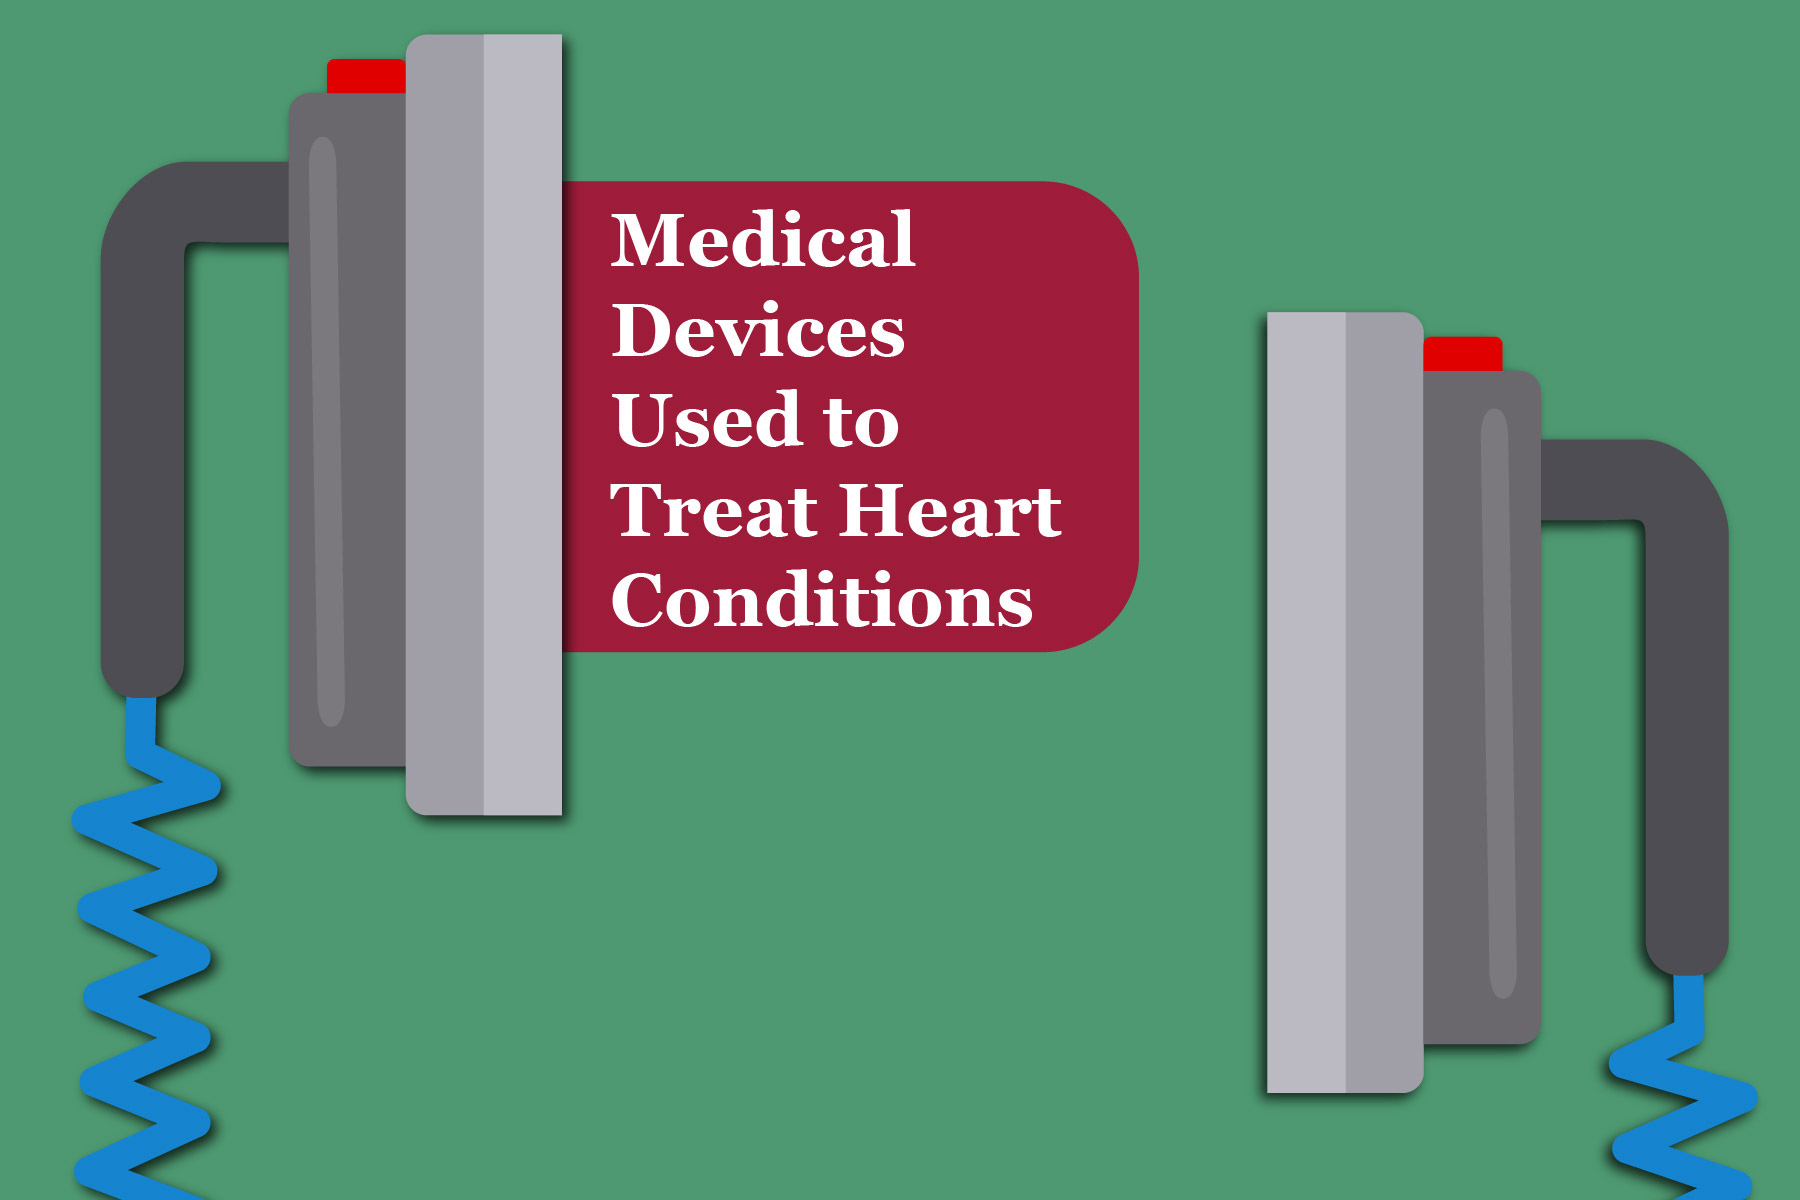 Medical Devices Used to Treat Heart Conditions